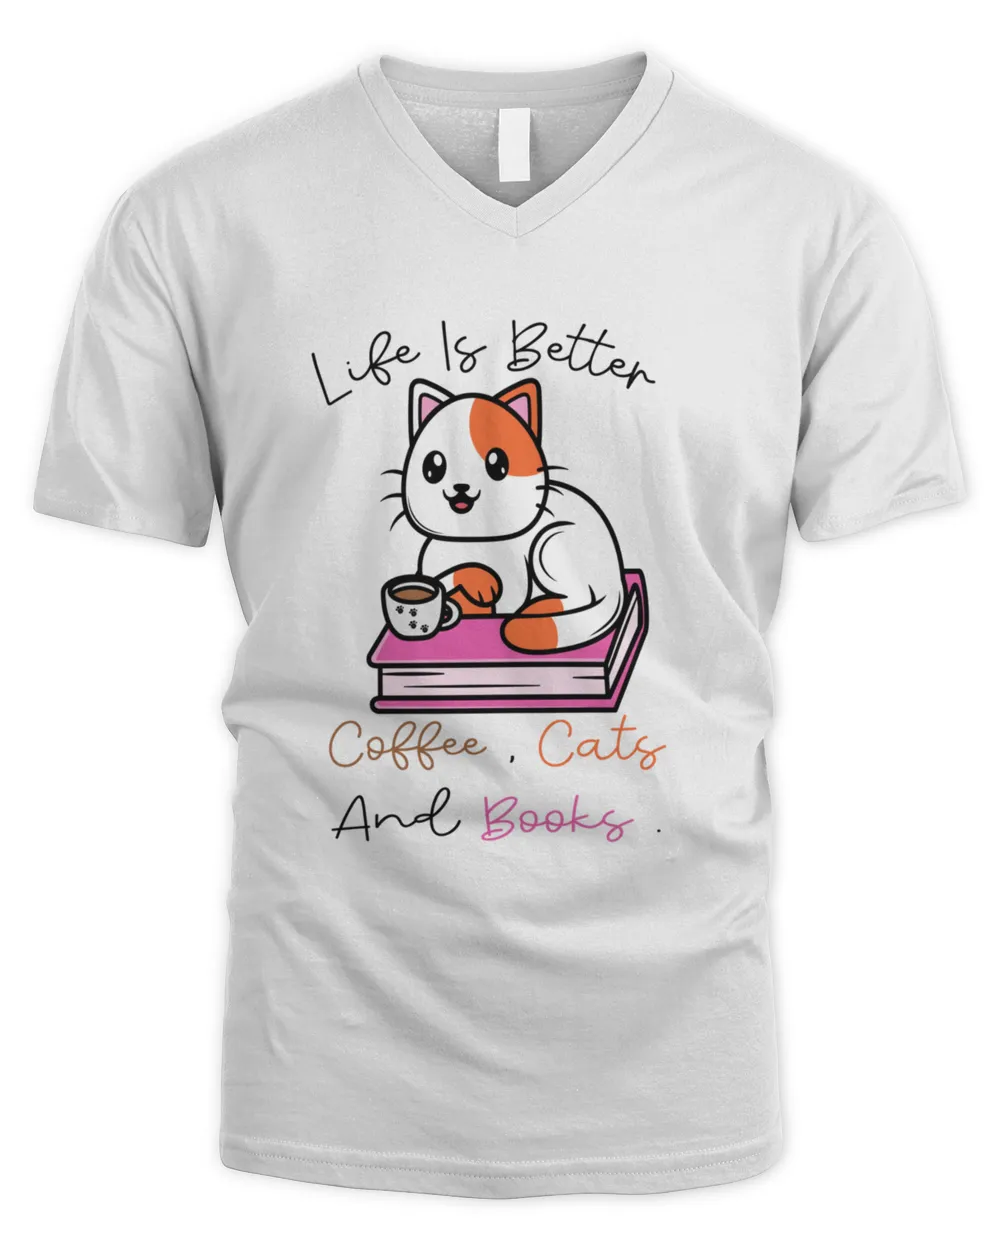 Life Is Better With Coffee Cats And Books  Cat Coffee gift  Cats And Books  Cat Lover gift  Cat Mom  Cute Cat 7780 T-Shirt